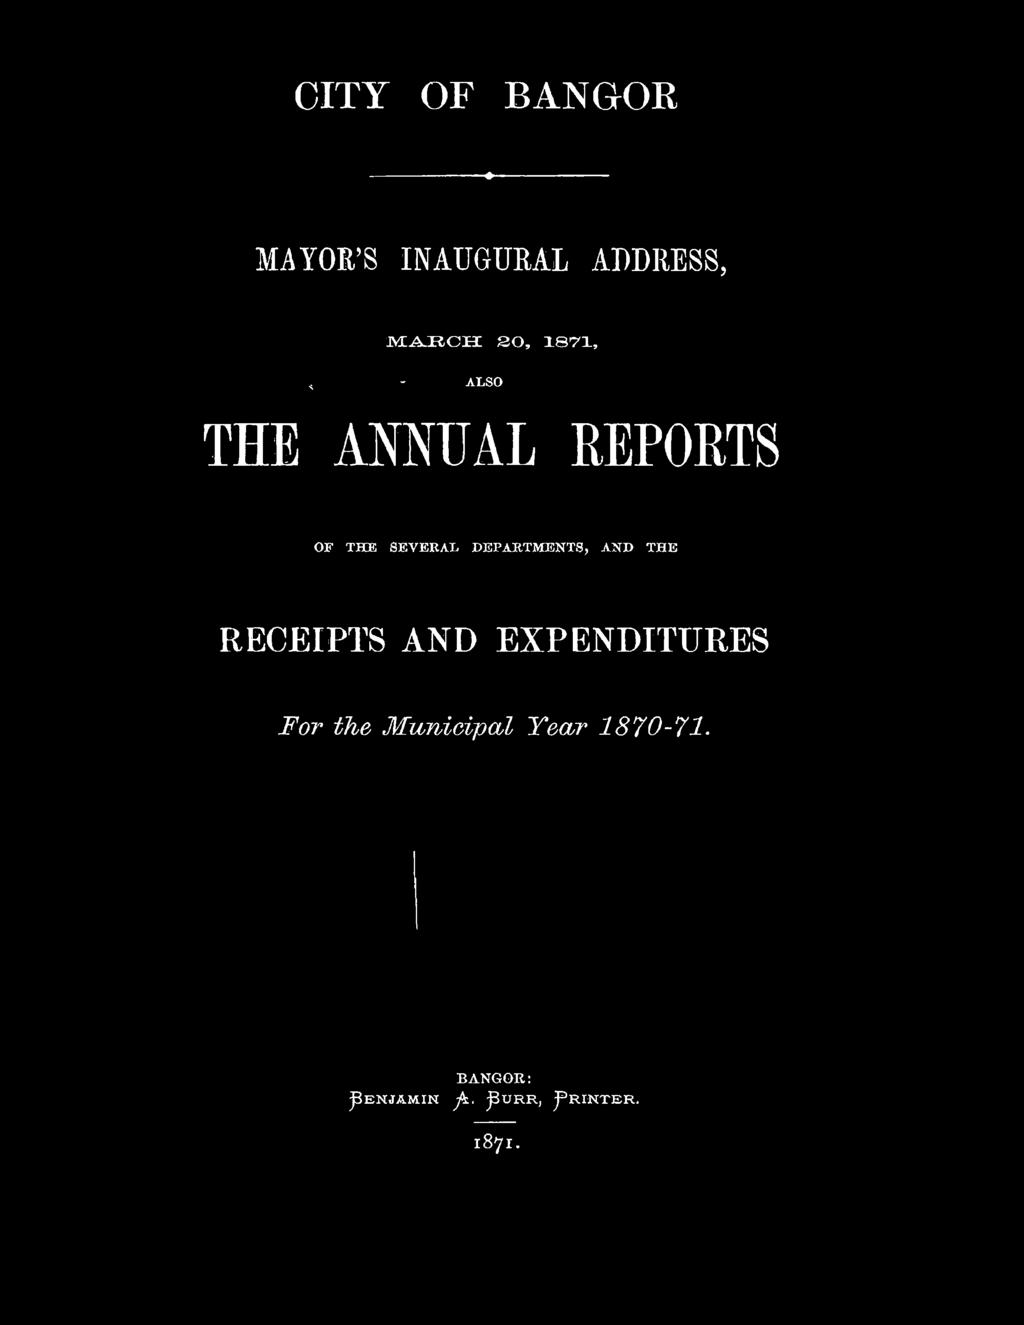 THE ANNUAL REPORTS OF THE SEVERAL